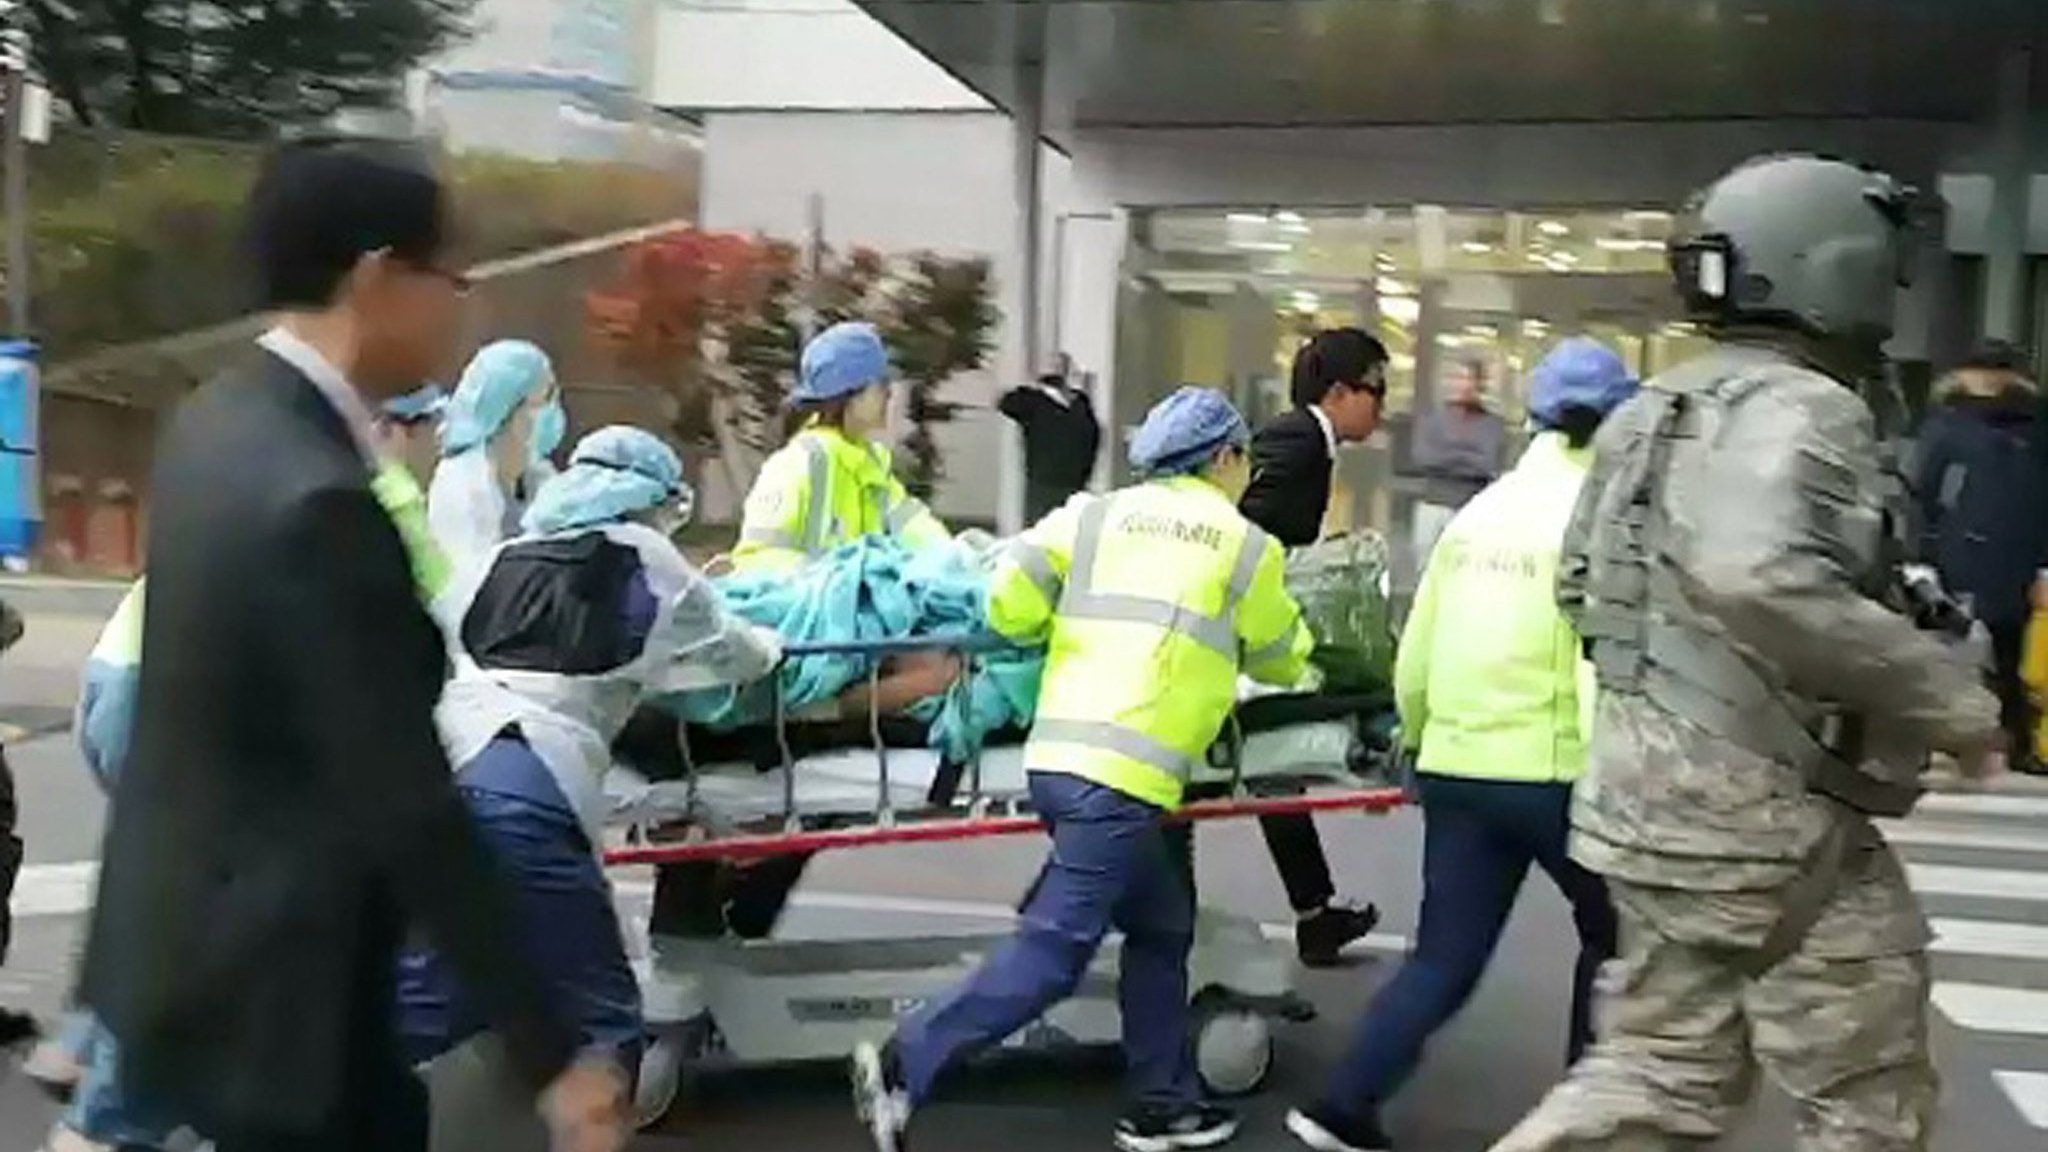 The North Korean soldier is rushed on a stretcher into a hospital in Suwon, Gyeonggi Province, 13 November 2017